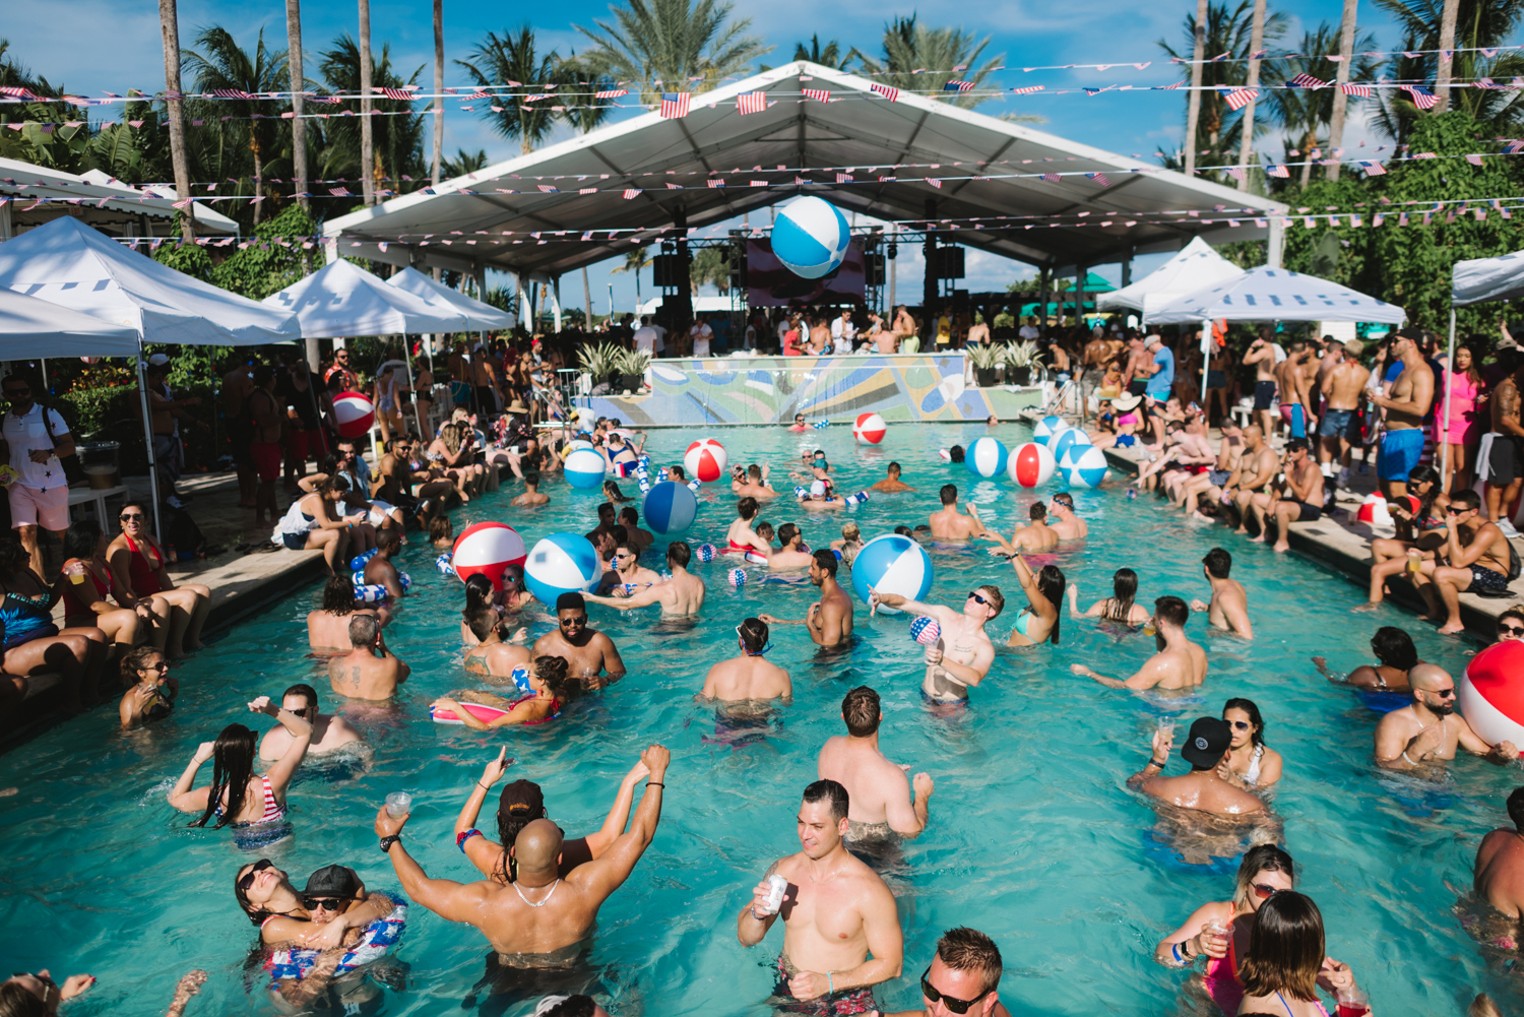 Pool party in full swing! - Picture of Kimpton Surfcomber Hotel, Miami Beach  - Tripadvisor